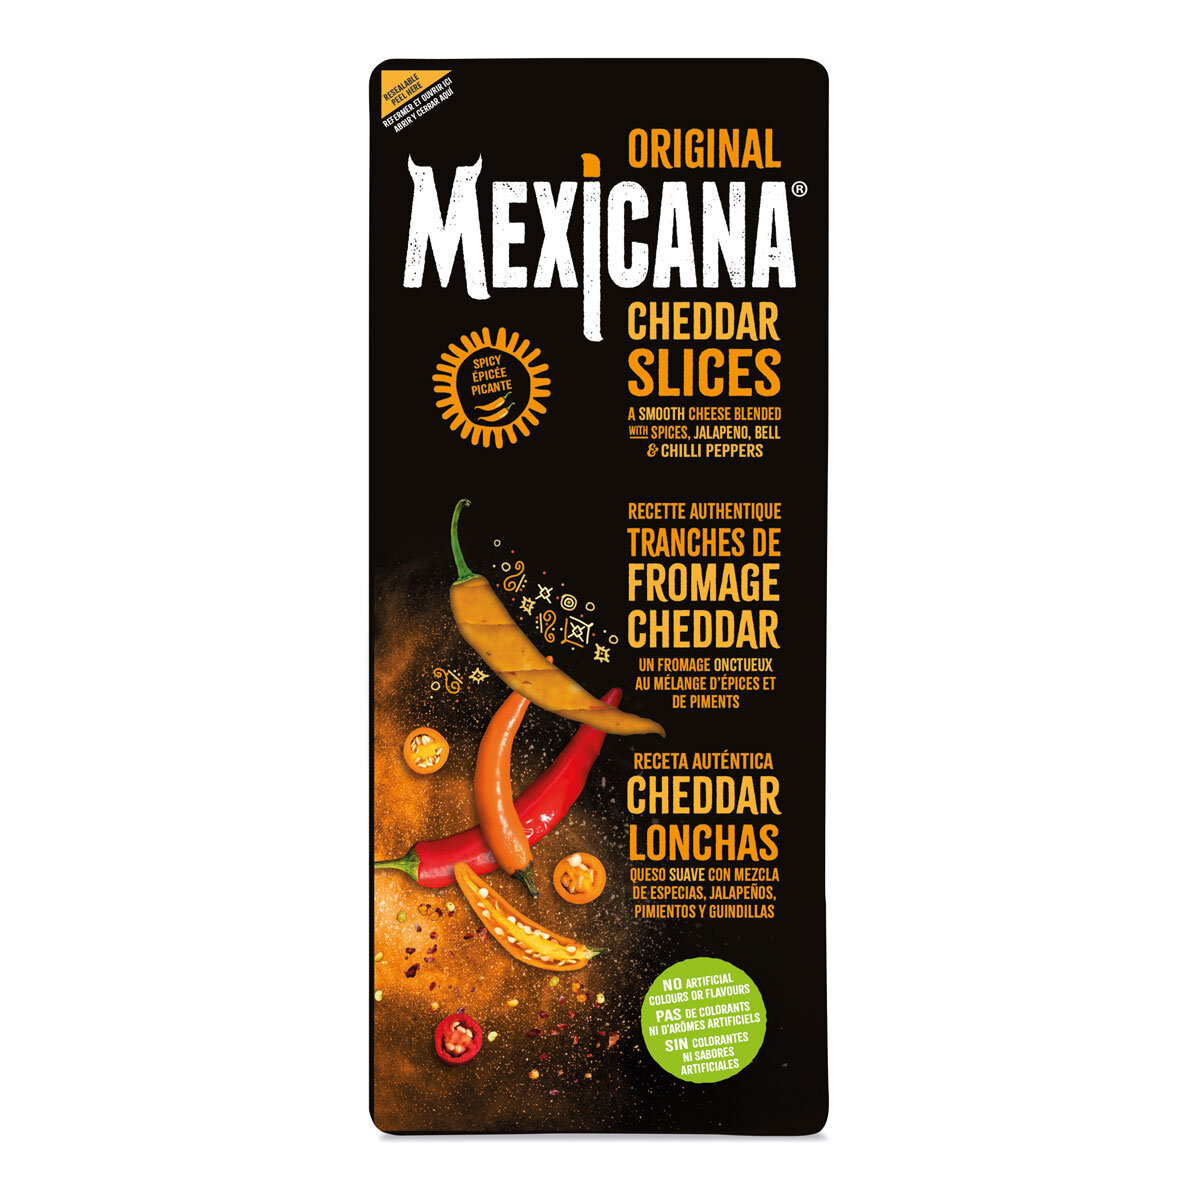 Image of packaging for Original Mexicana Cheddar Slices